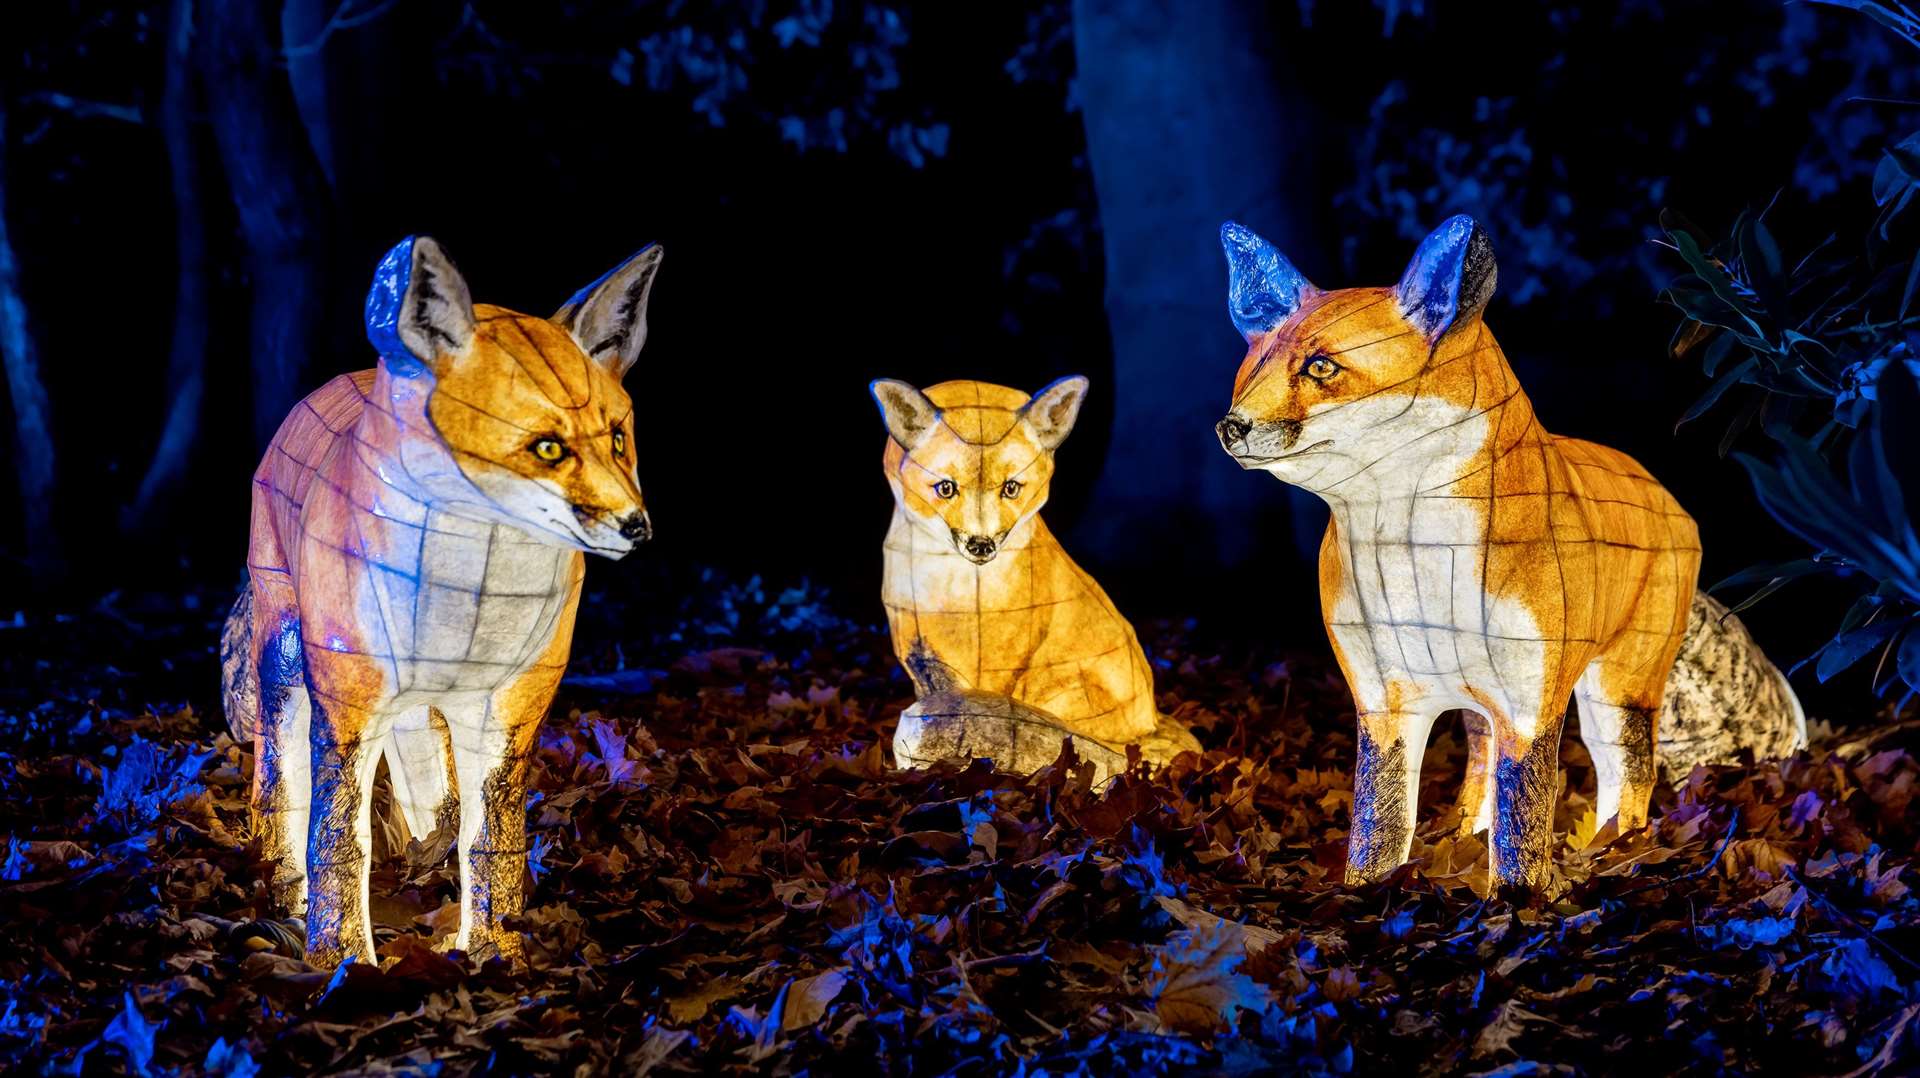 Illuminated animals featured at a previous event in Wollaton